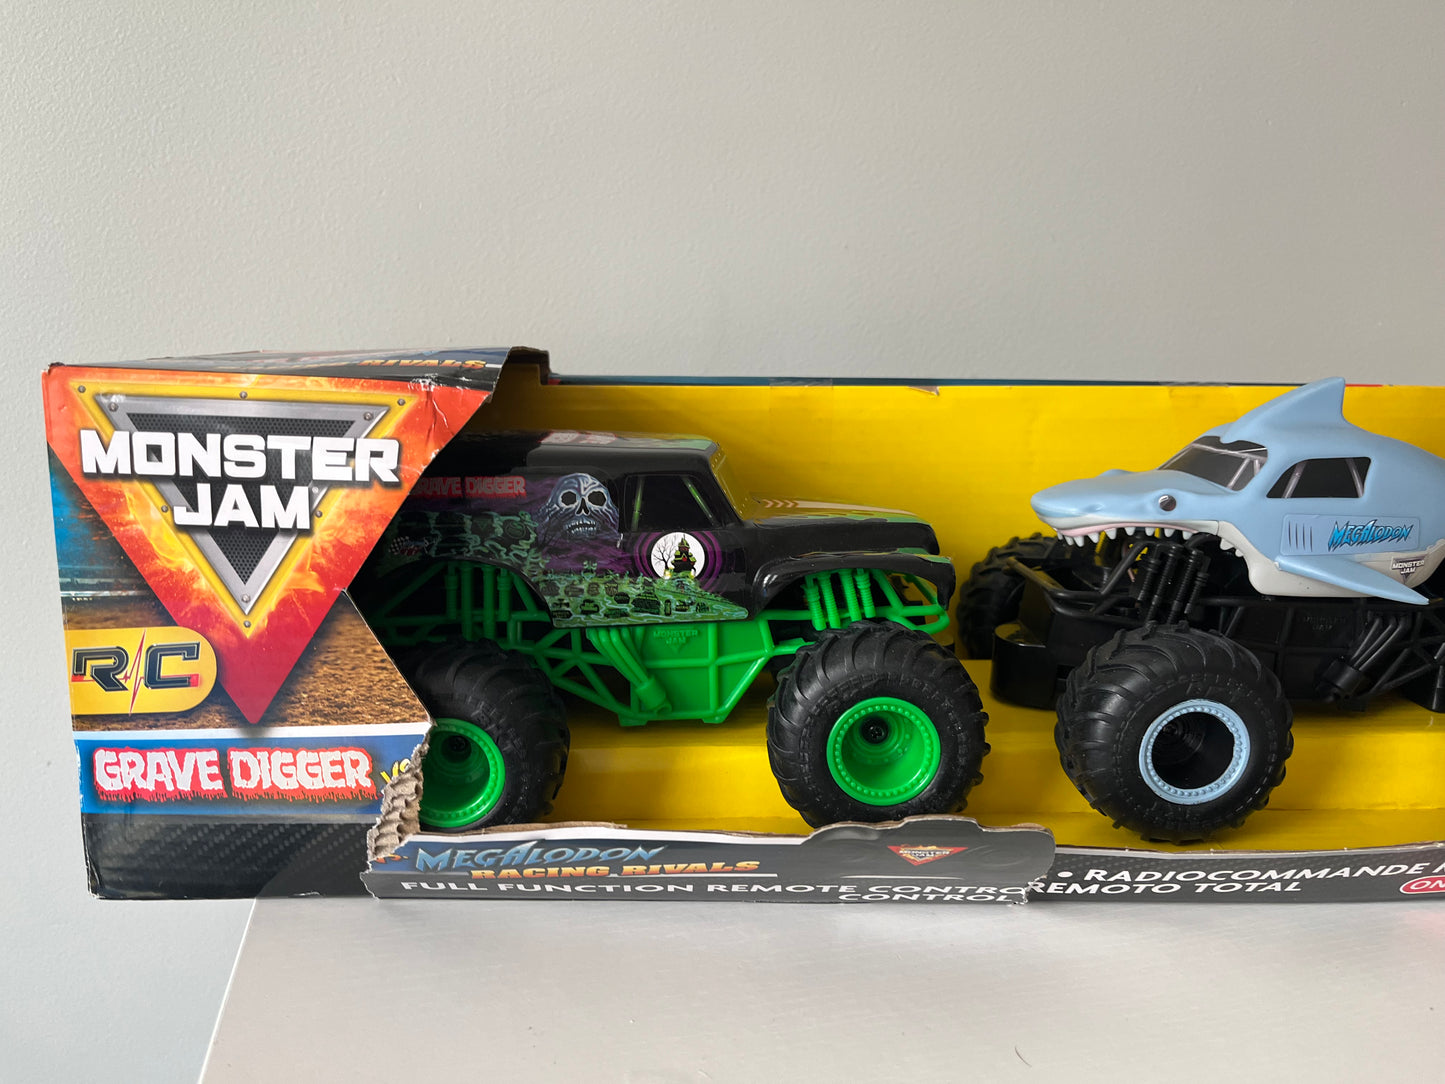 PPU 45241 (Evendale/Blue Ash) New in *damaged* Box  -  2 pack Monster Jam Remote Control Trucks